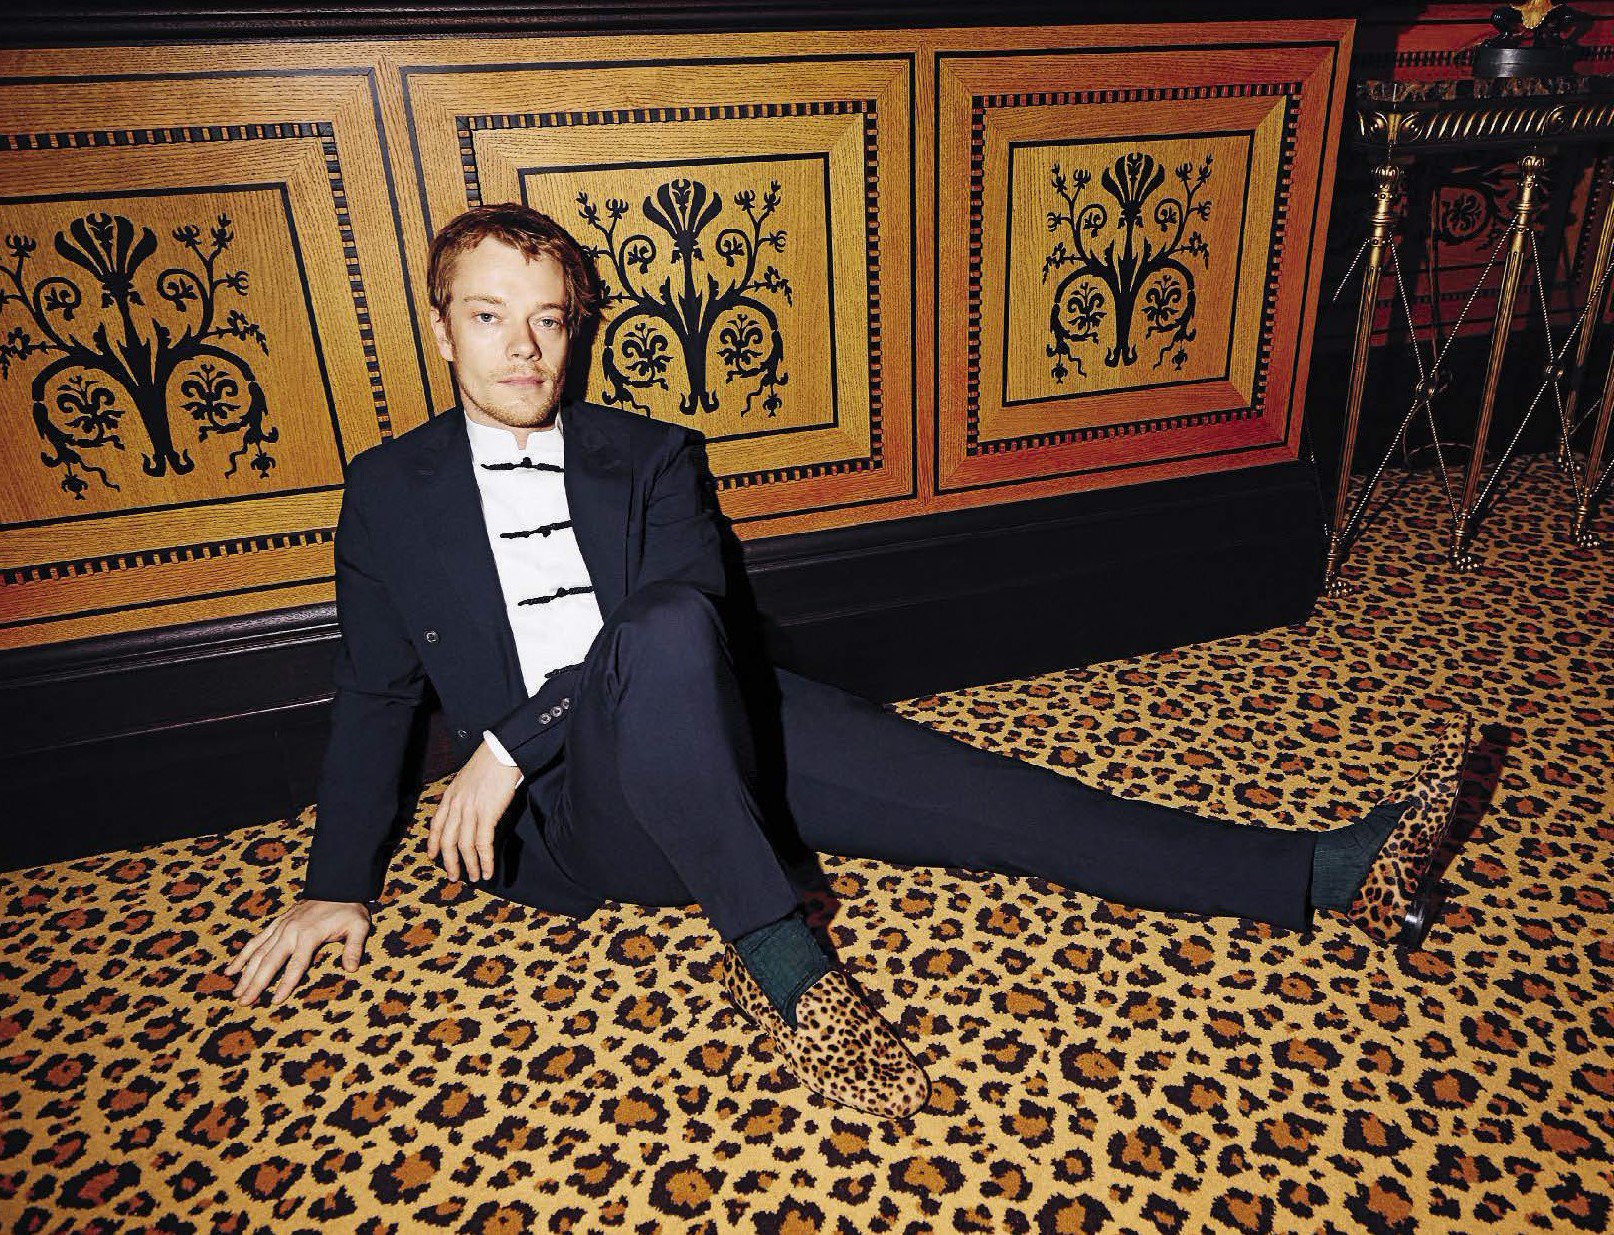 Happy birthday to mr alfie allen who deserves all the love, happiness and support in the entire world 